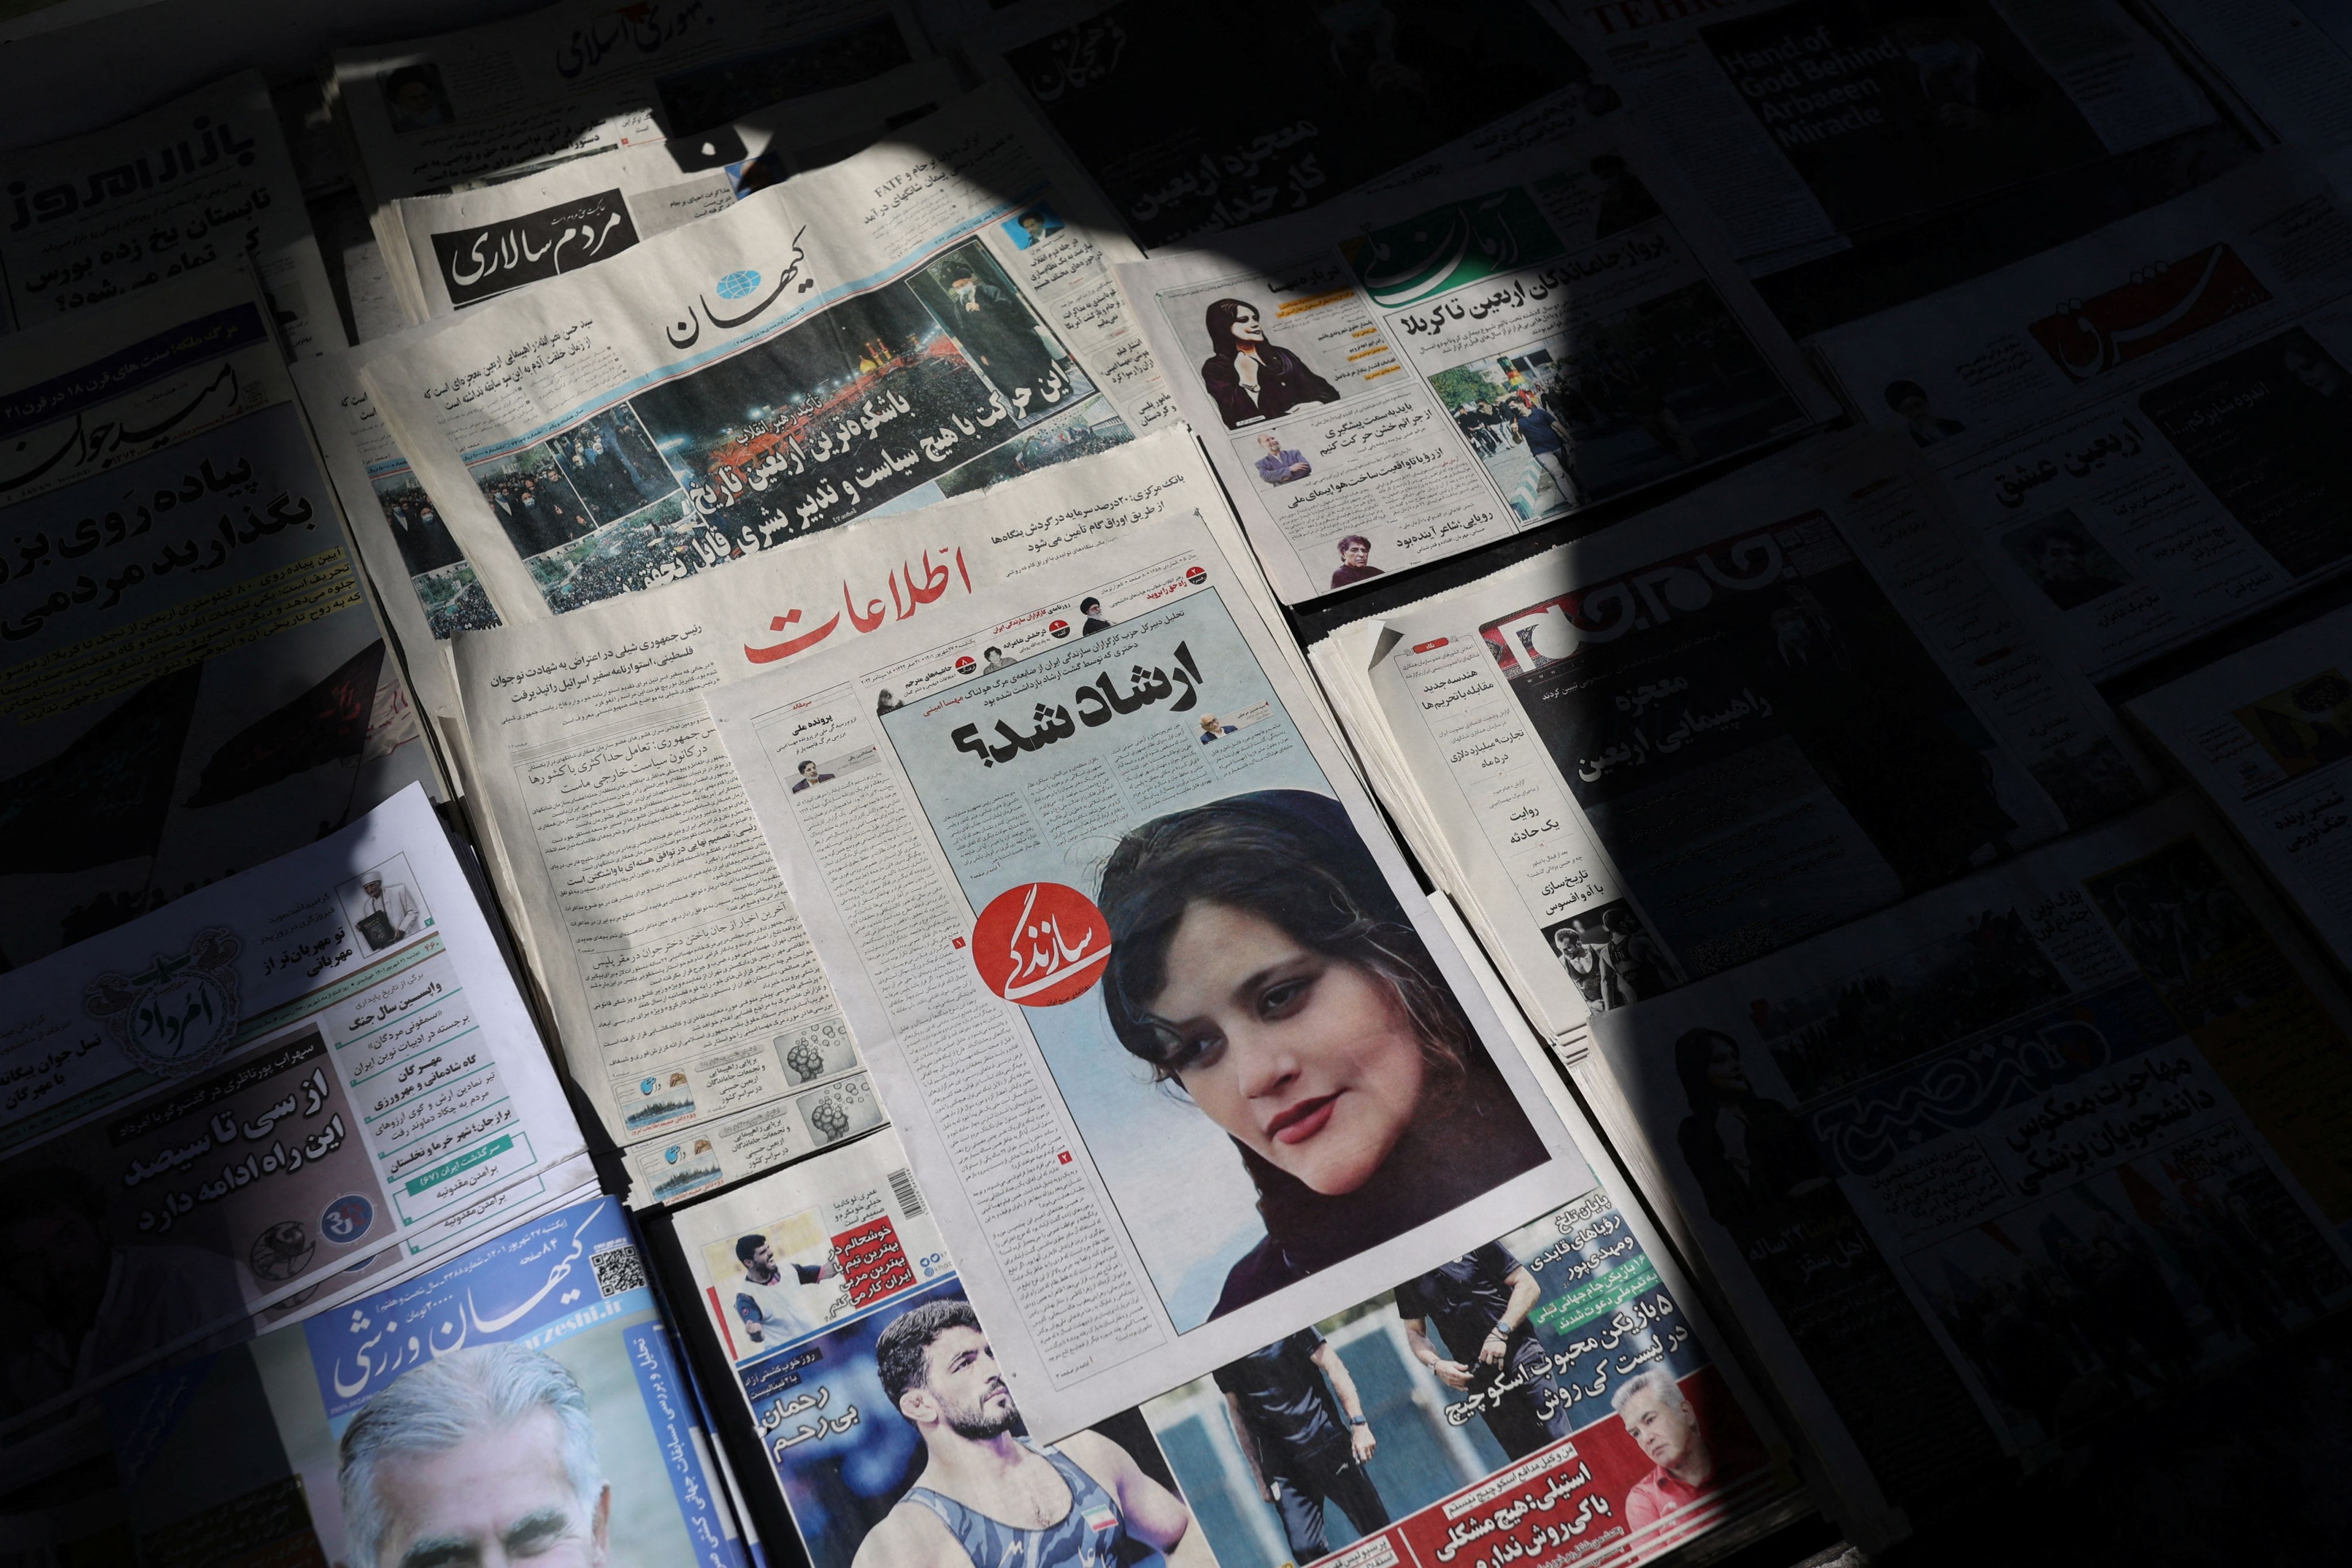 Iran ranks second in the world for arresting journalists